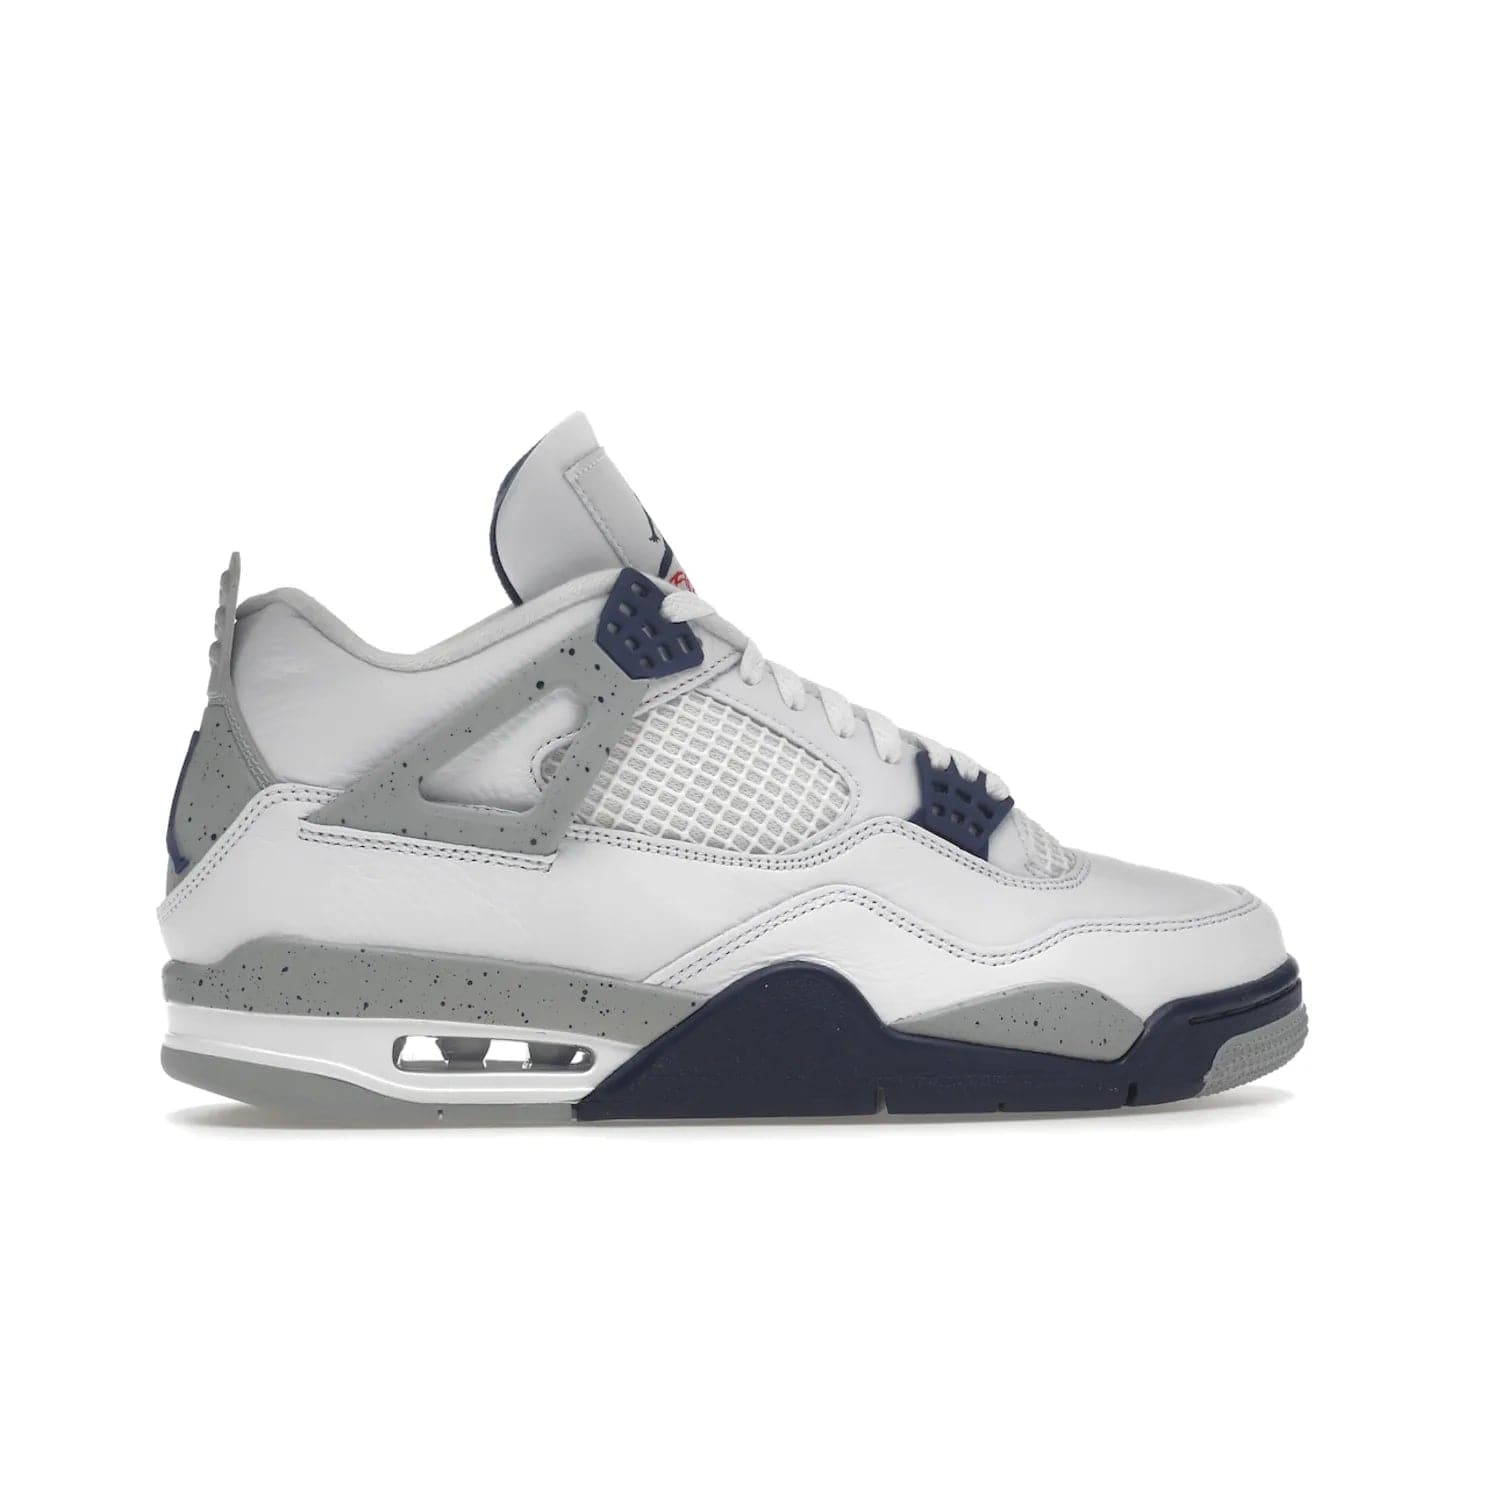 Jordan 4 Retro Midnight Navy - Image 36 - Only at www.BallersClubKickz.com - Shop the Air Jordan Retro 4 White Midnight Navy. Stand out with a classic white leather upper, black support wings, midnight navy eyelets, and Crimson Jumpman tongue tag. Unbeatable comfort with two-tone polyurethane midsole with encapsulated Air technology. Get yours before October 29th, 2022.